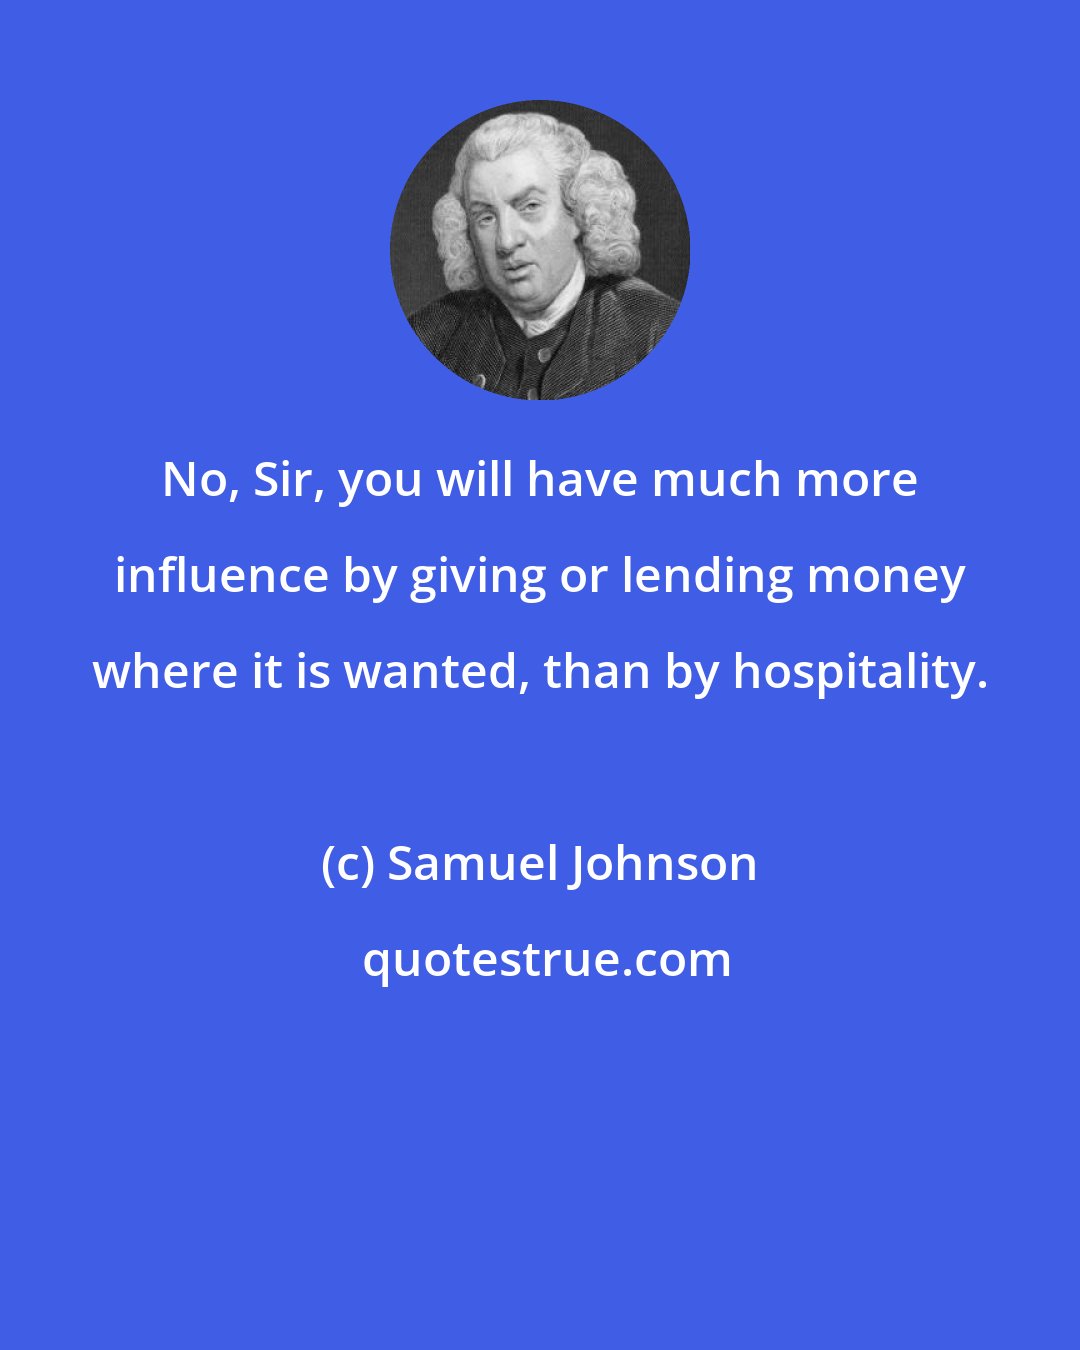 Samuel Johnson: No, Sir, you will have much more influence by giving or lending money where it is wanted, than by hospitality.